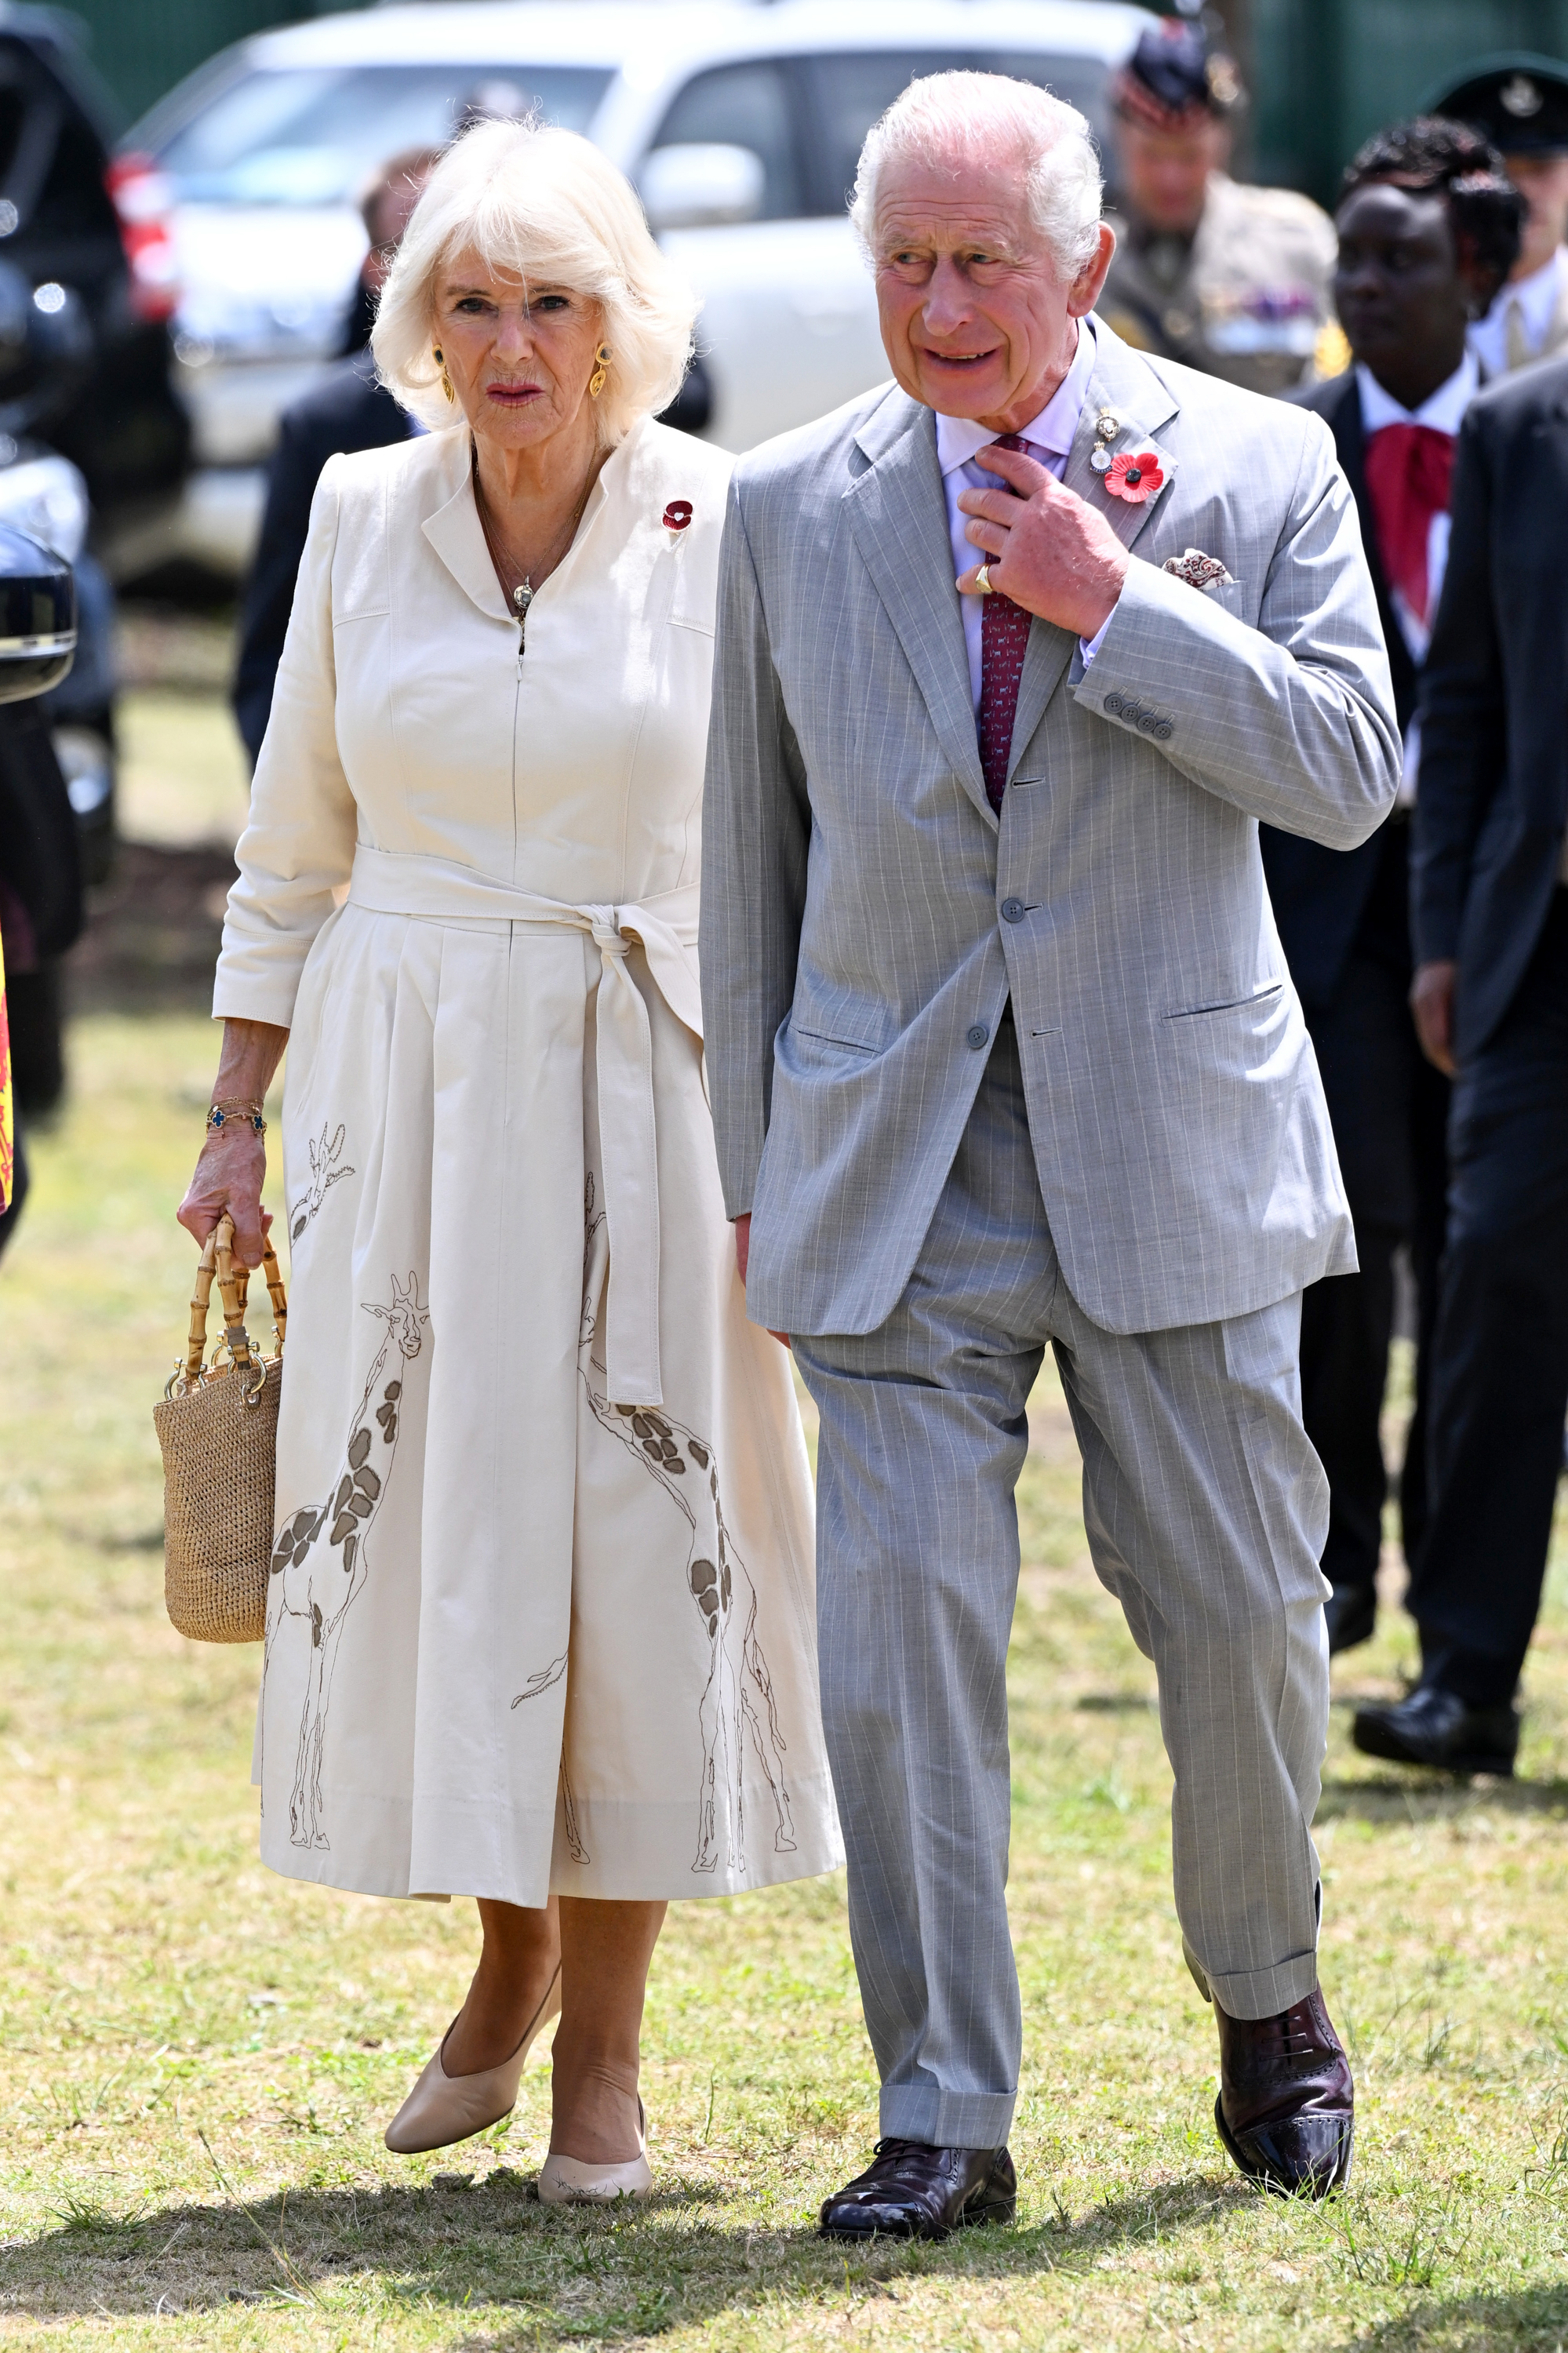 King Charles III and Queen Camilla during a visit at the Commonwealth War Graves Commission cemetery on November 1, 2023 in Nairobi, Kenya | Source: Getty Images